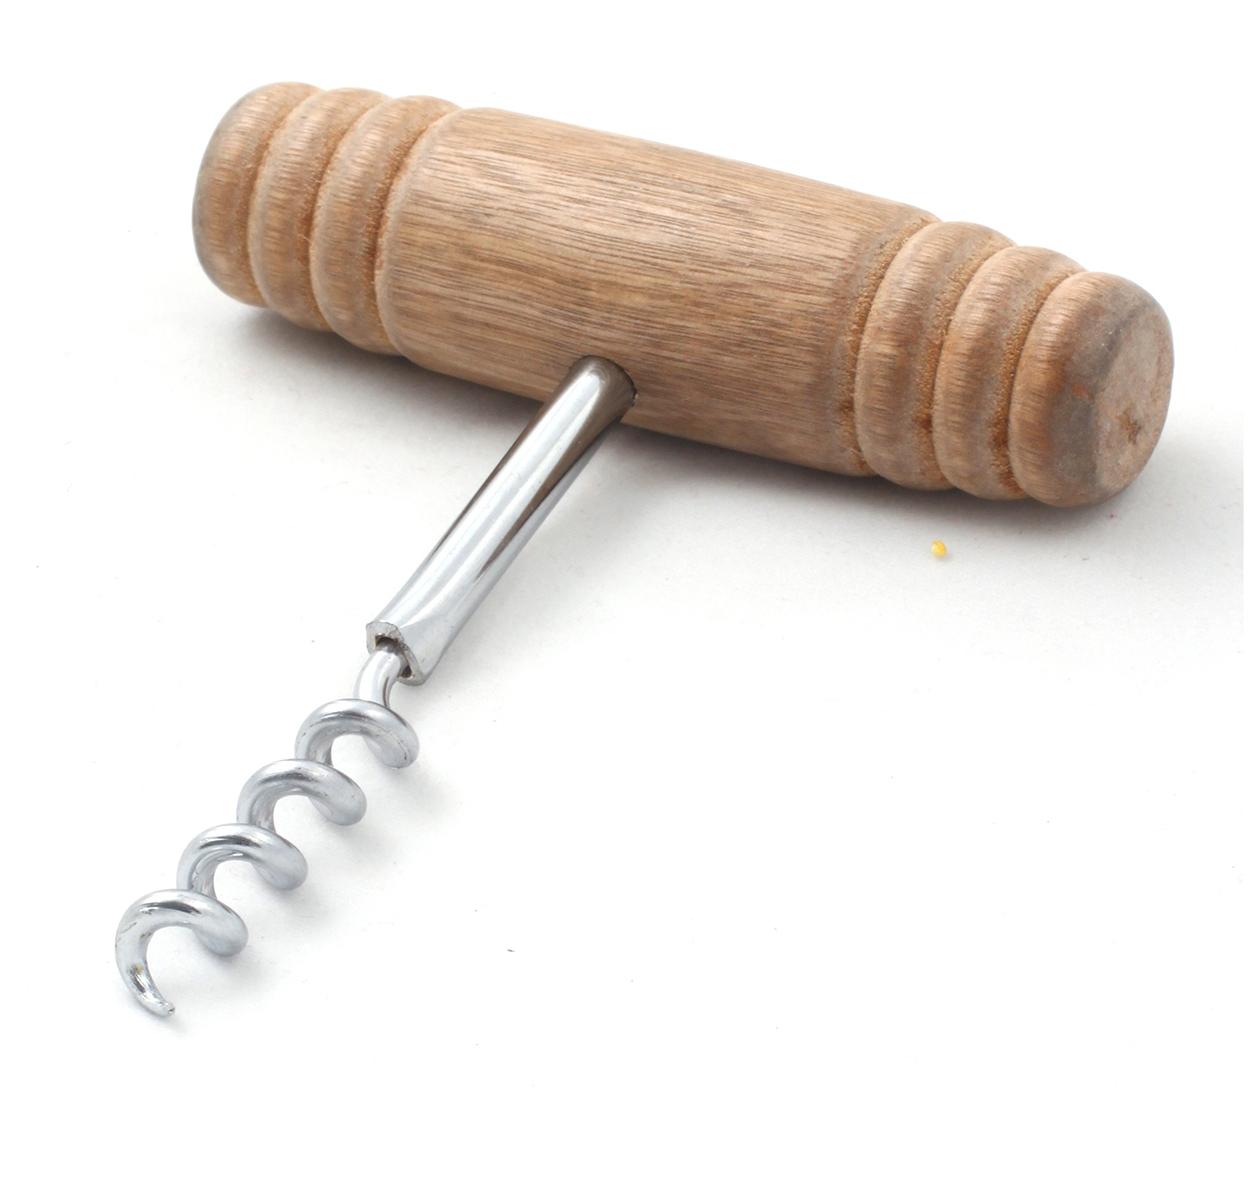 NEW Wooden Handle Corkscrew w/Stainless Steel Coil 